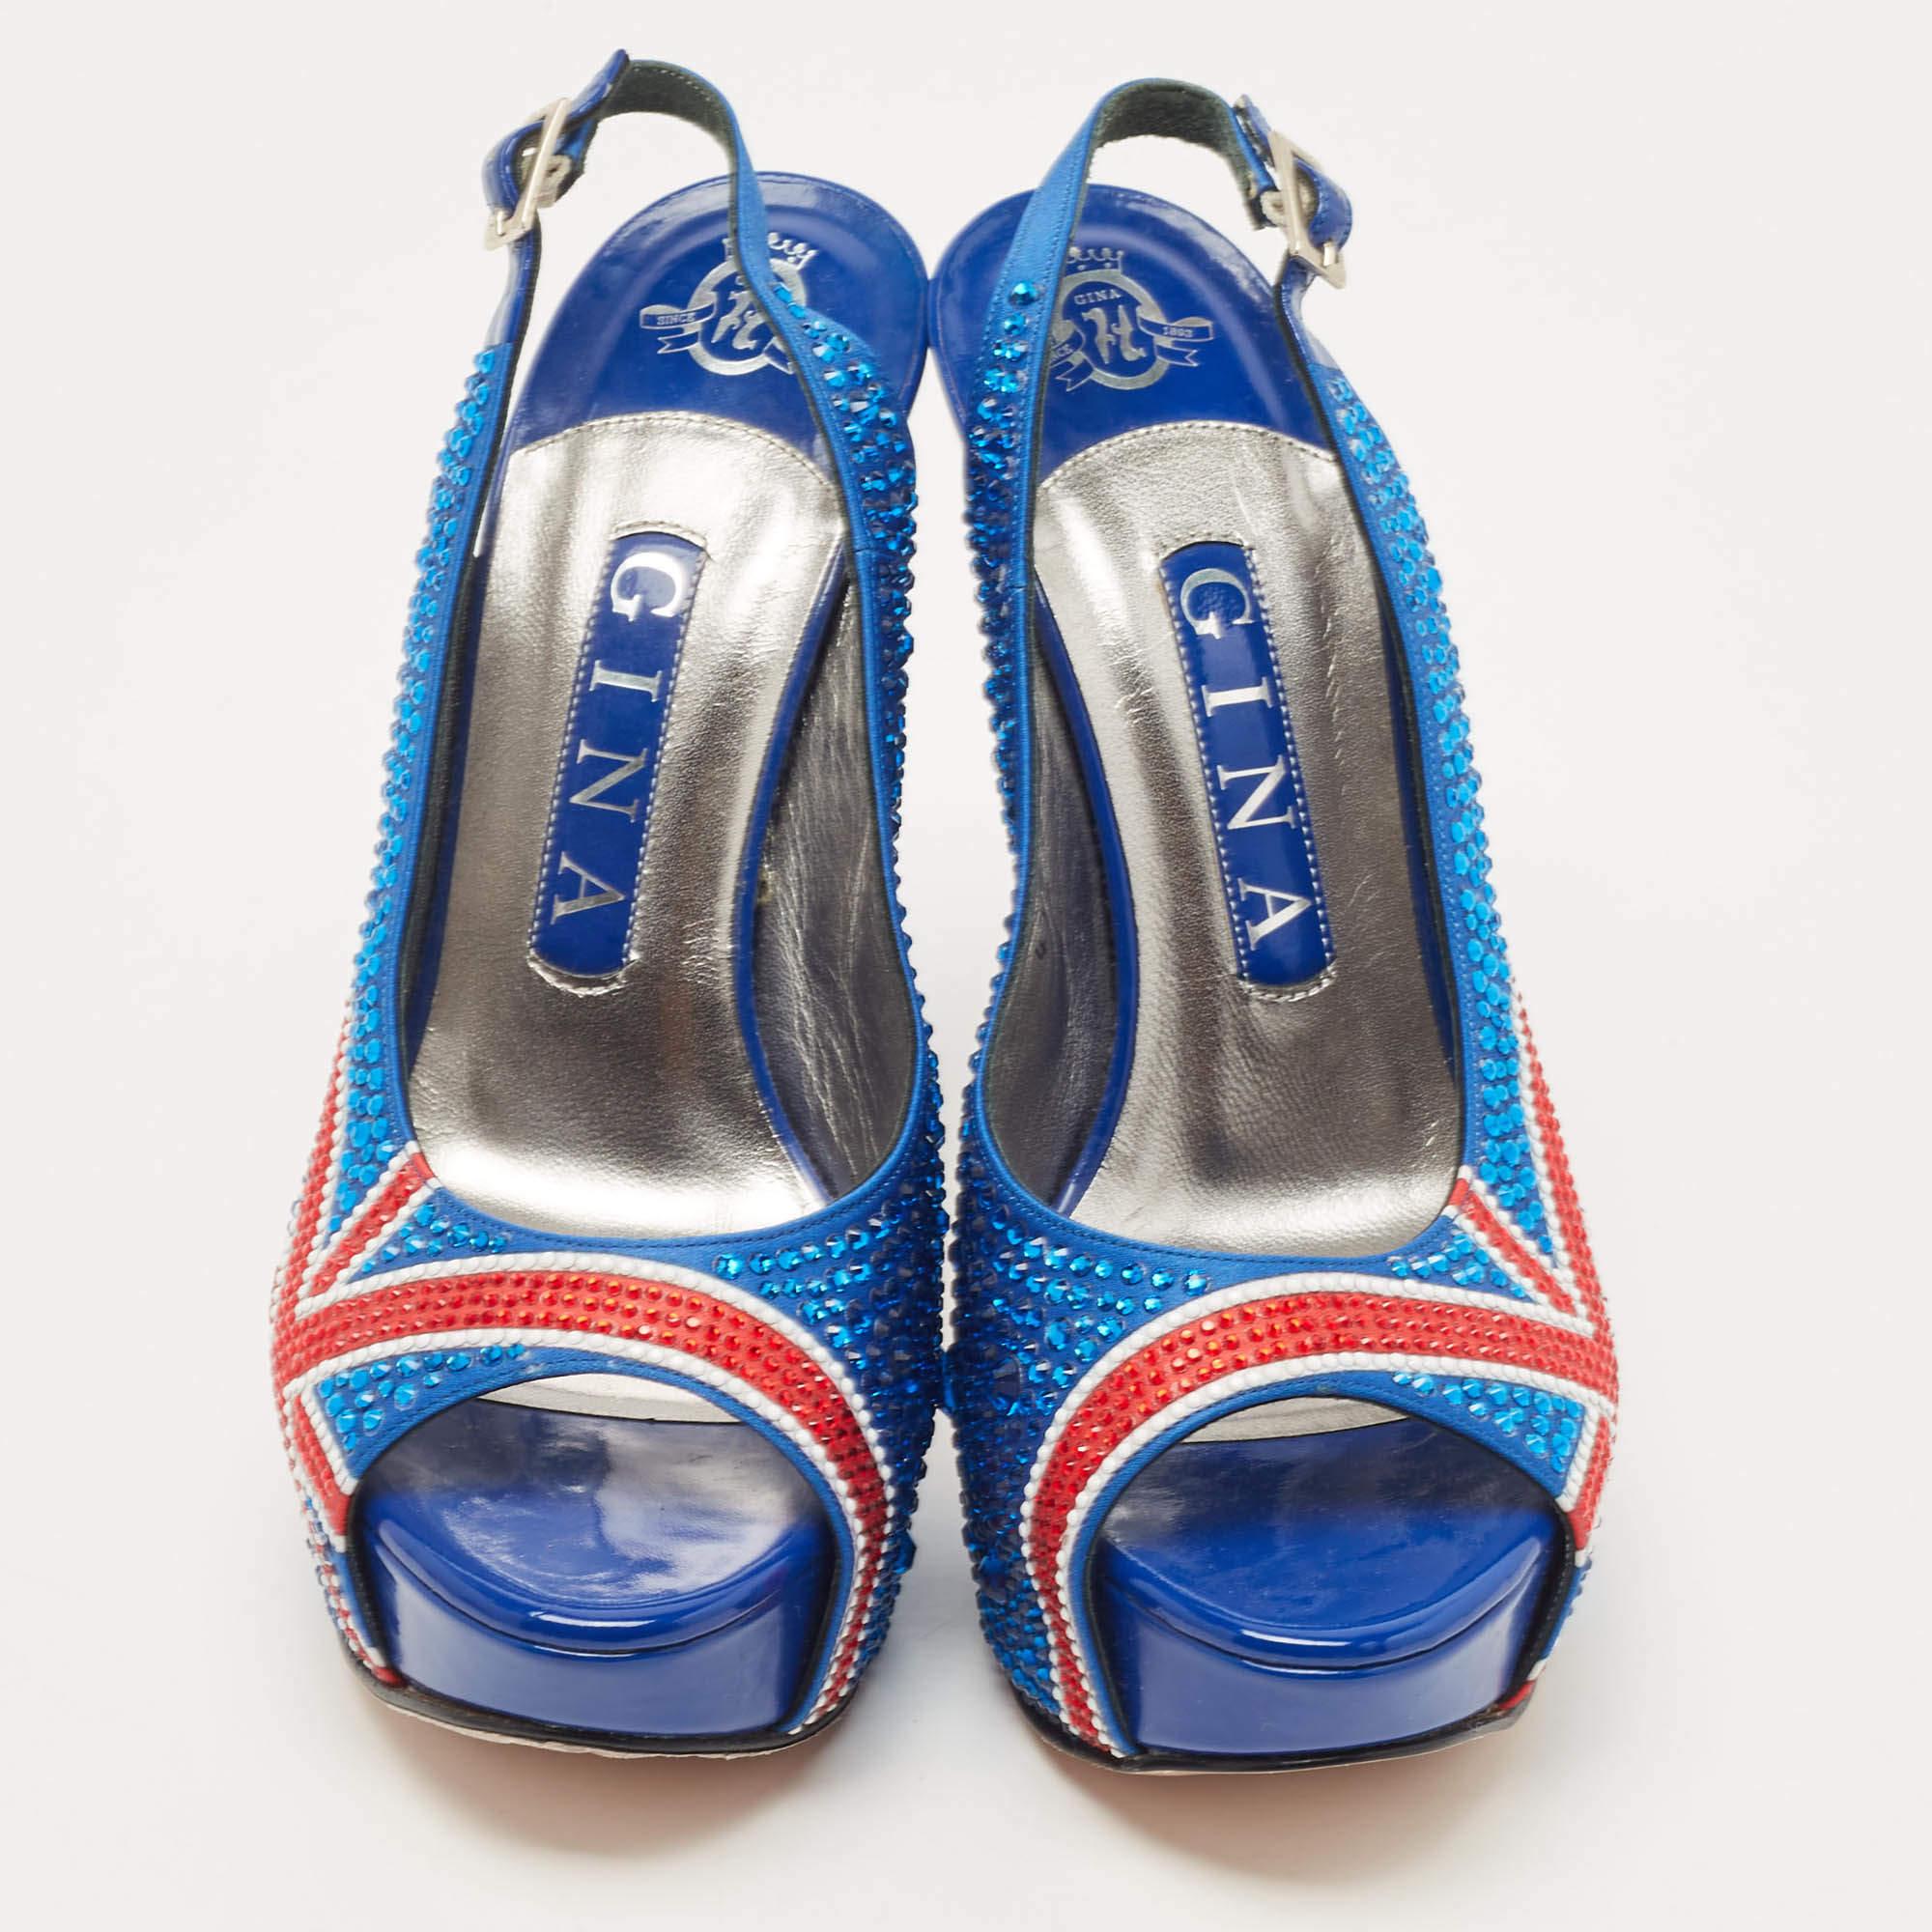 To celebrate the Diamond Jubilee of the Olympics and support the British team, Gina, being true to its roots, created these Union Jack sandals. They are crafted from satin and detailed with crystal embellishments on the uppers.

Includes: Original